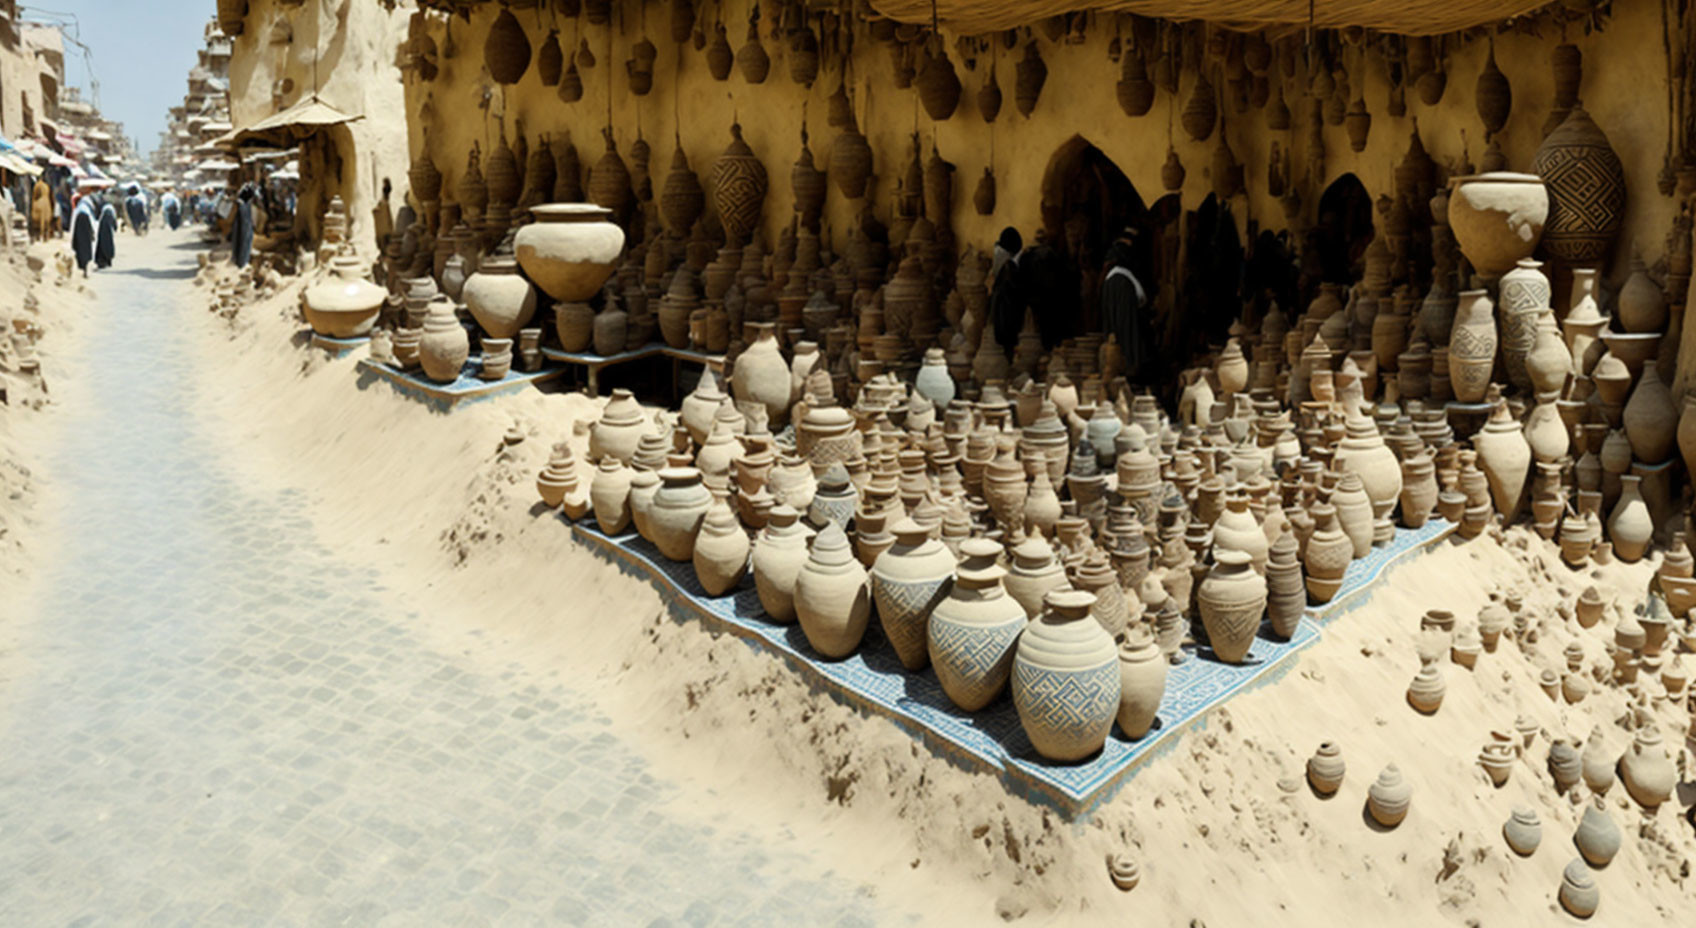 Desert town street with pottery pieces and bustling market.